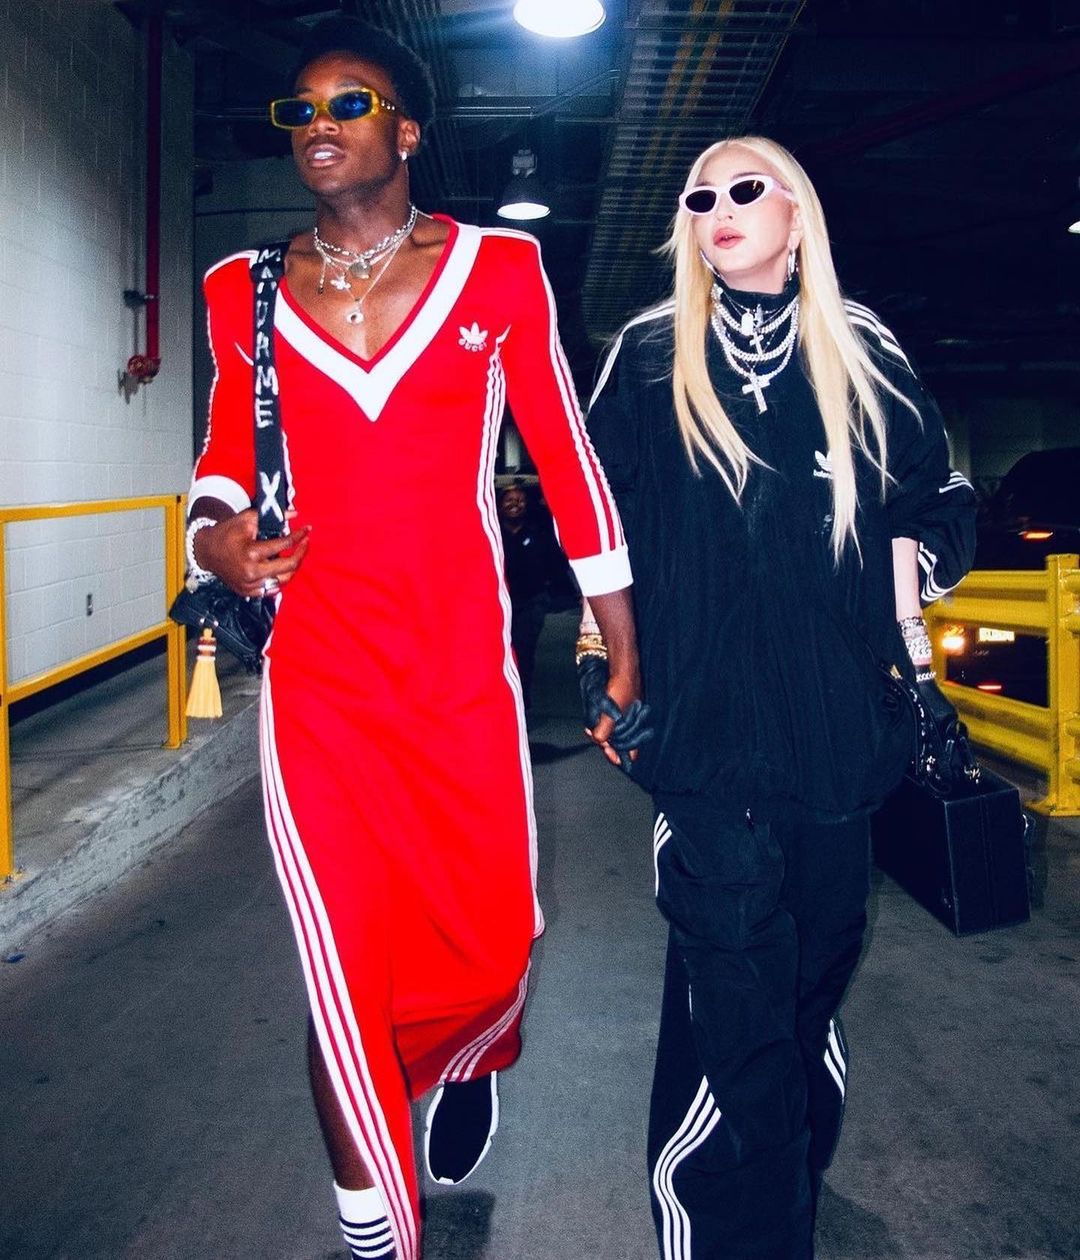 Zoeken bank Religieus Matching But Different: Madonna and Her Son David Banda Stepped Out in  Designer Adidas Looks by Gucci and Balenciaga